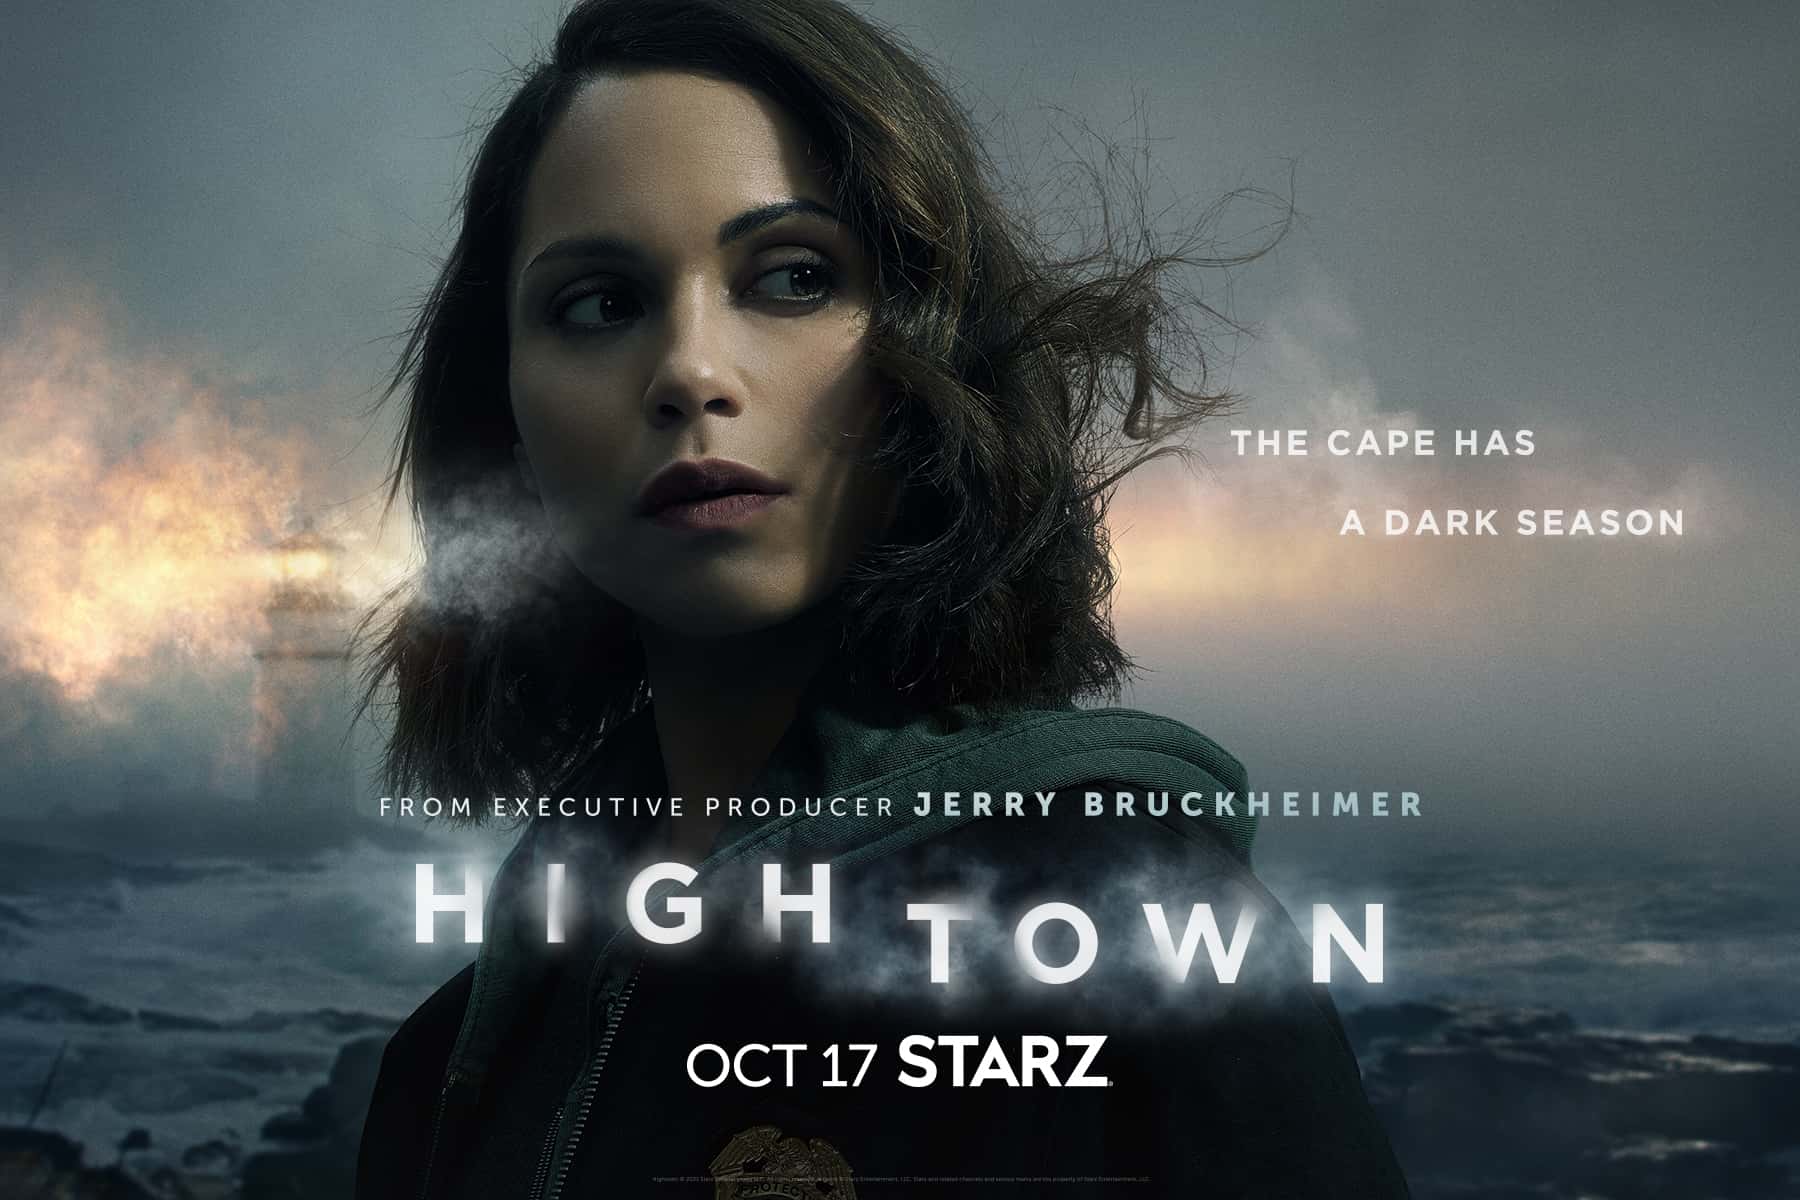 All About the Latest Season of “Hightown”